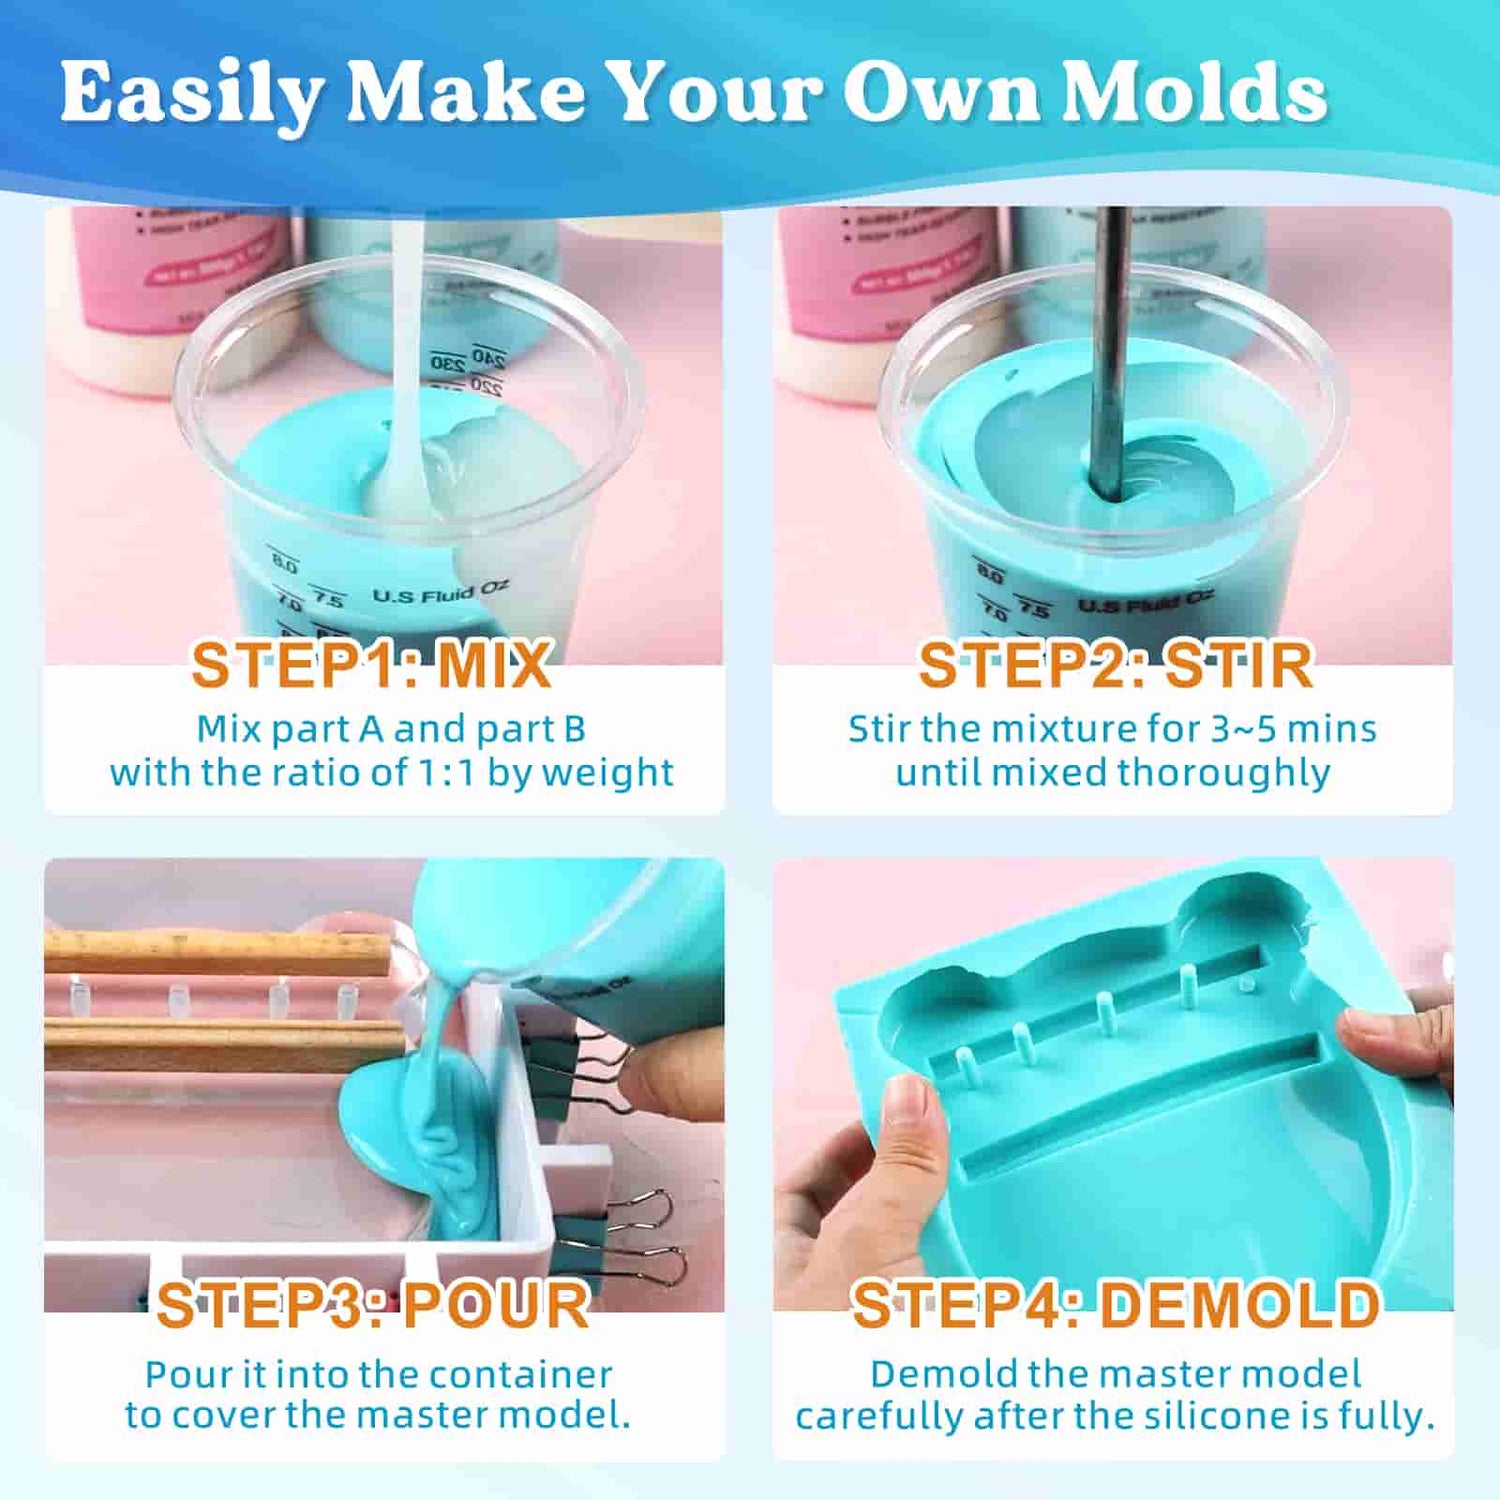 Let's Resin Adjustable Mold Housing for Silicone Molds Making, Mold Master fo